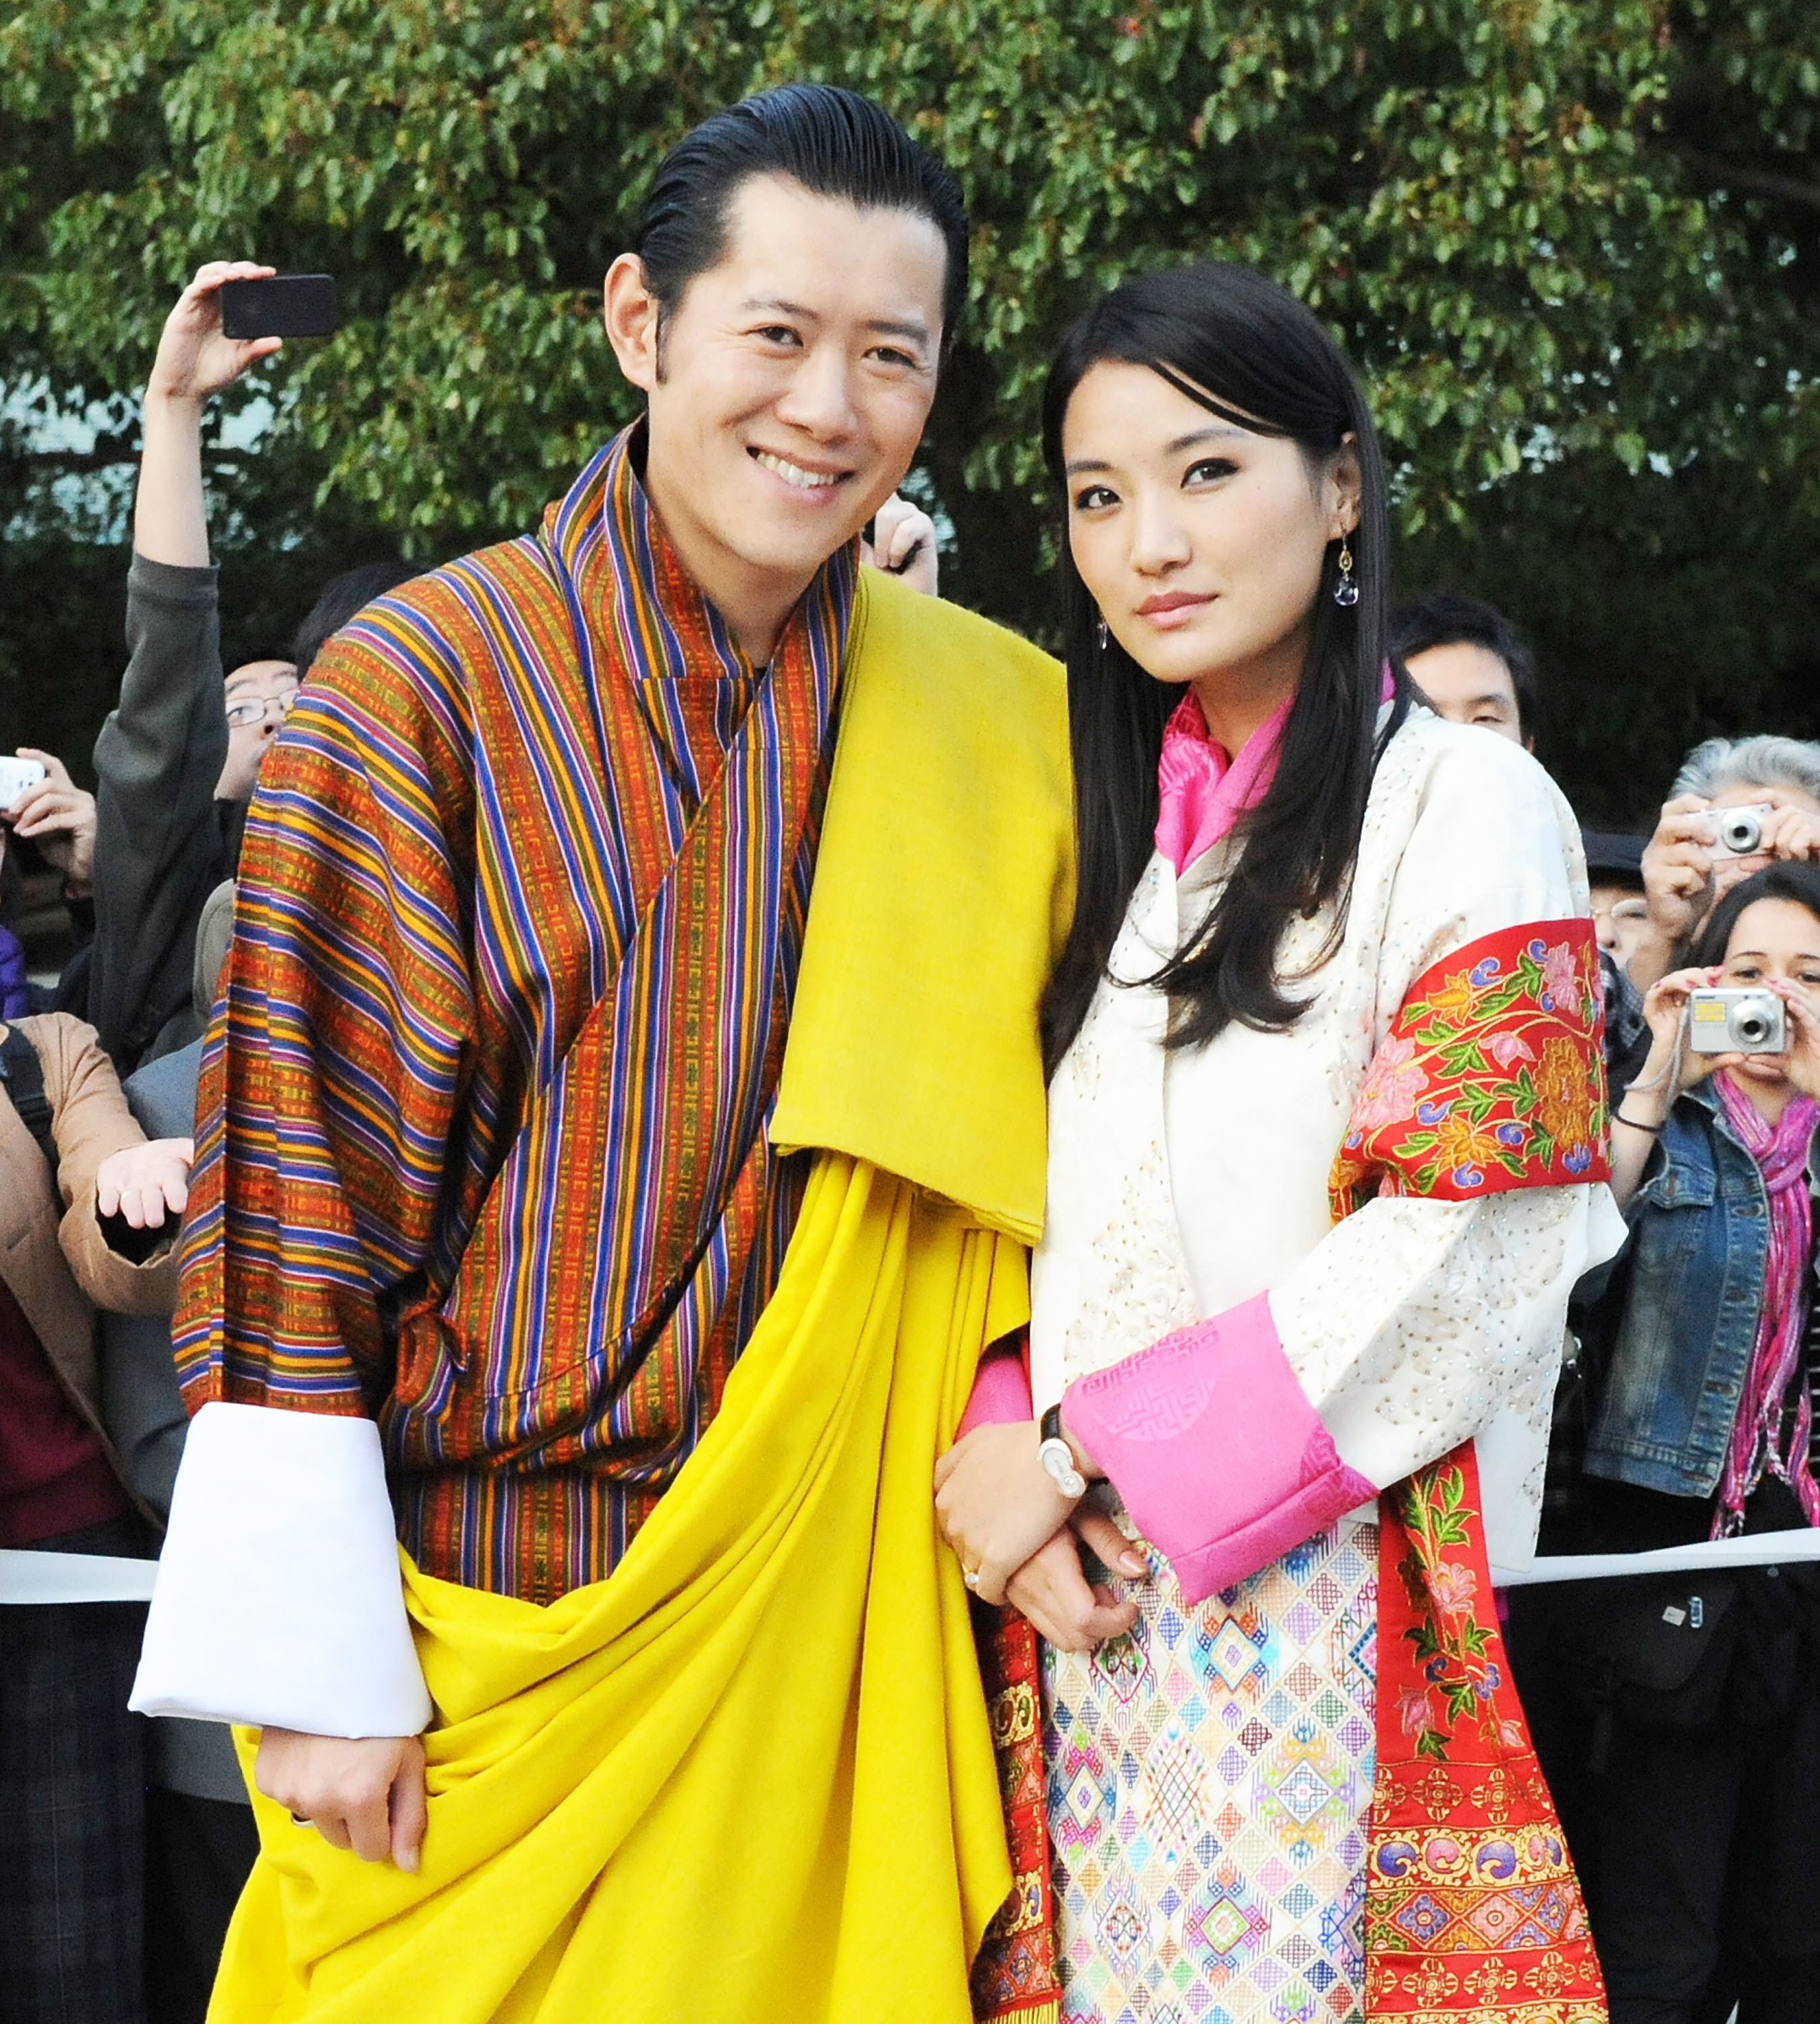 the king and queen dressed in traditional clothing